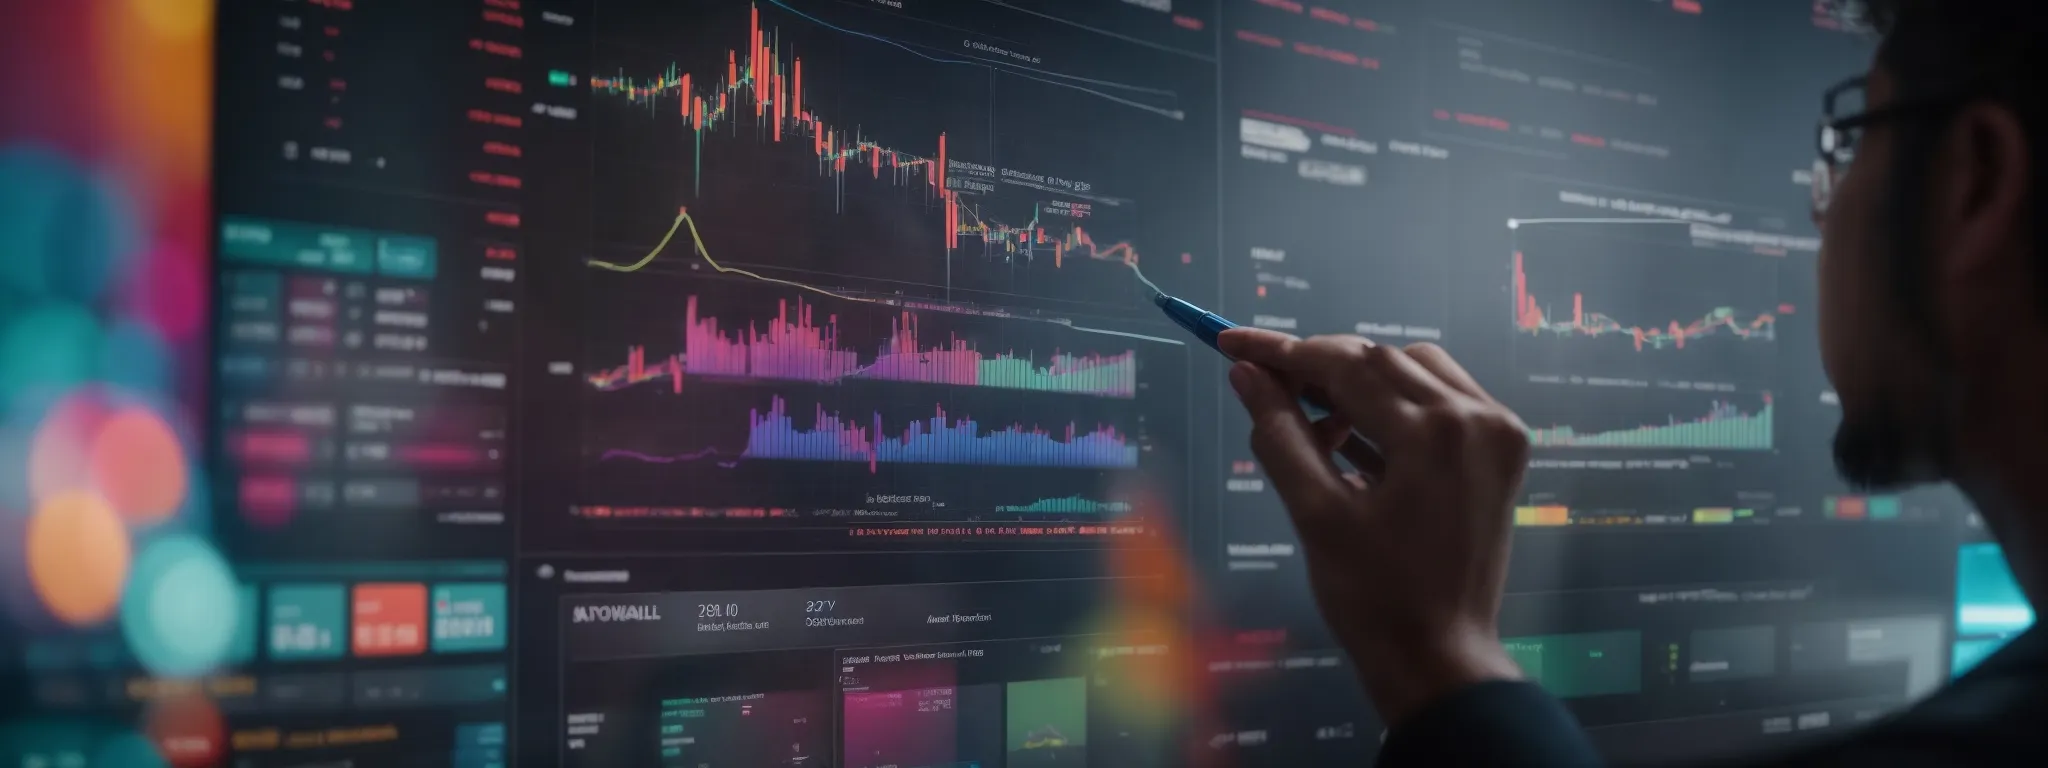 a marketer strategizes an ad campaign on a digital interface with colorful analytics and graphs depicting keyword performance.